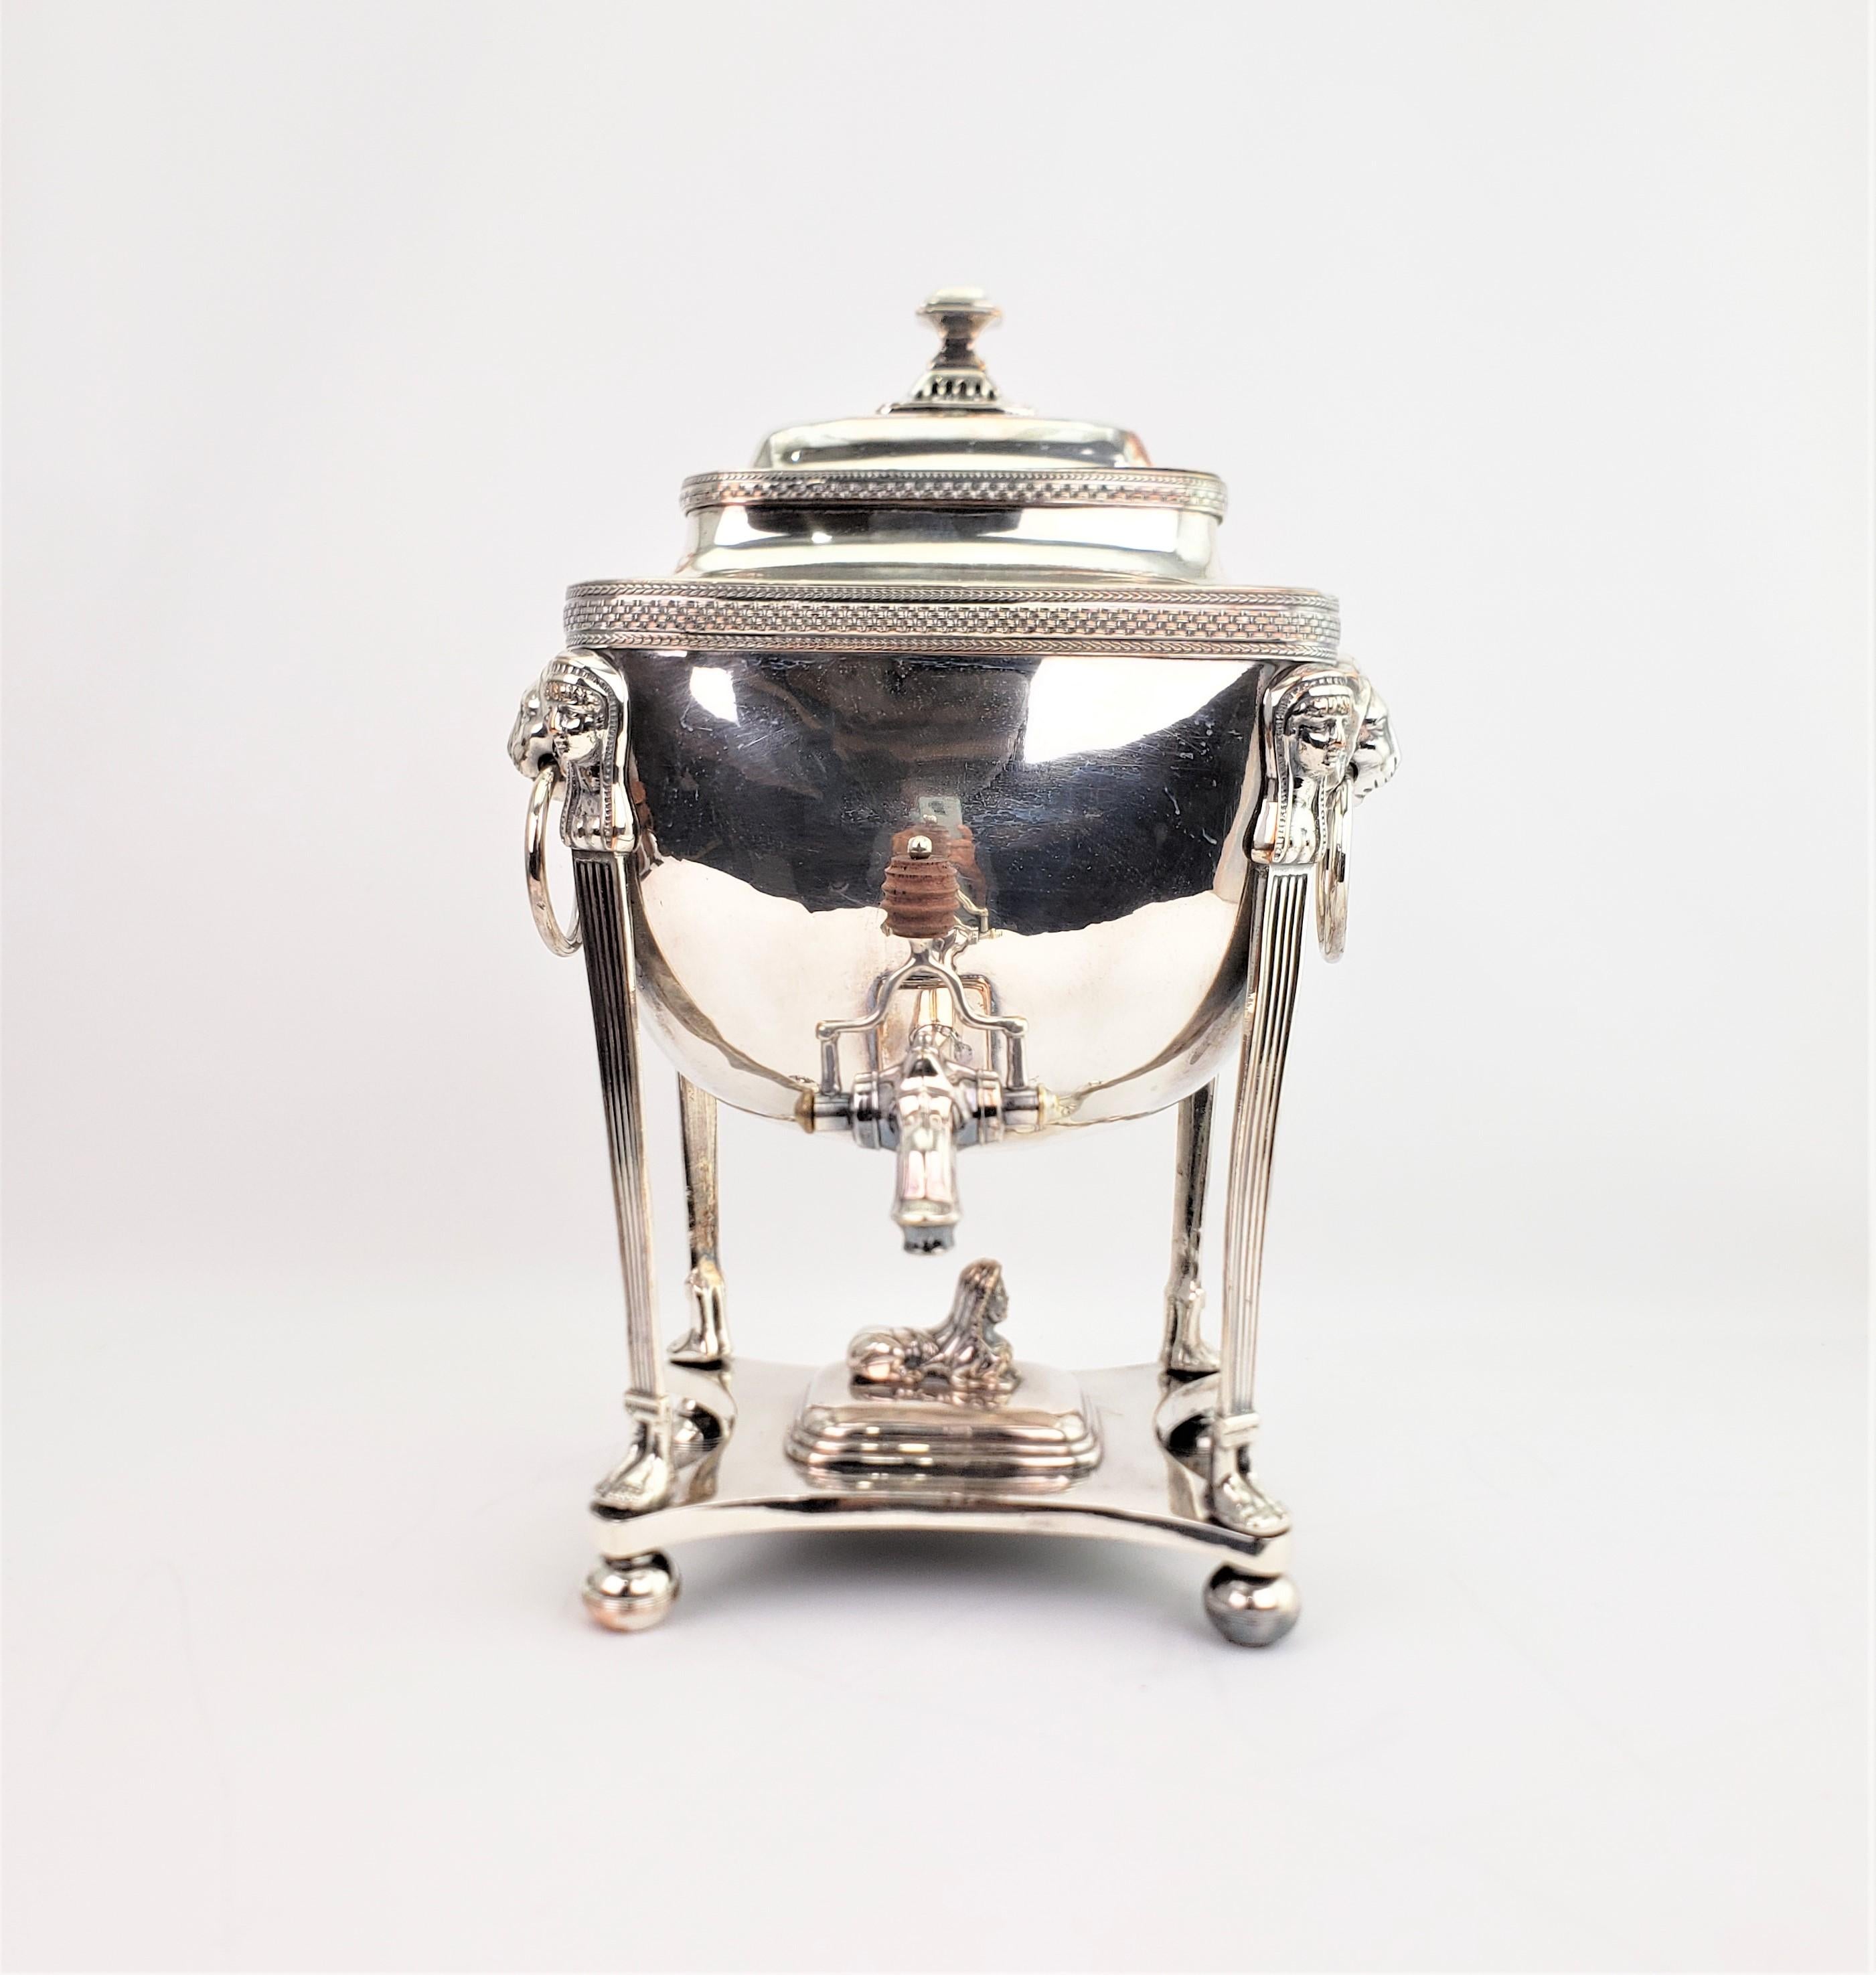 English Antique Old Sheffield Silver Plated Hot Water Server with Egyptian Revival Decor